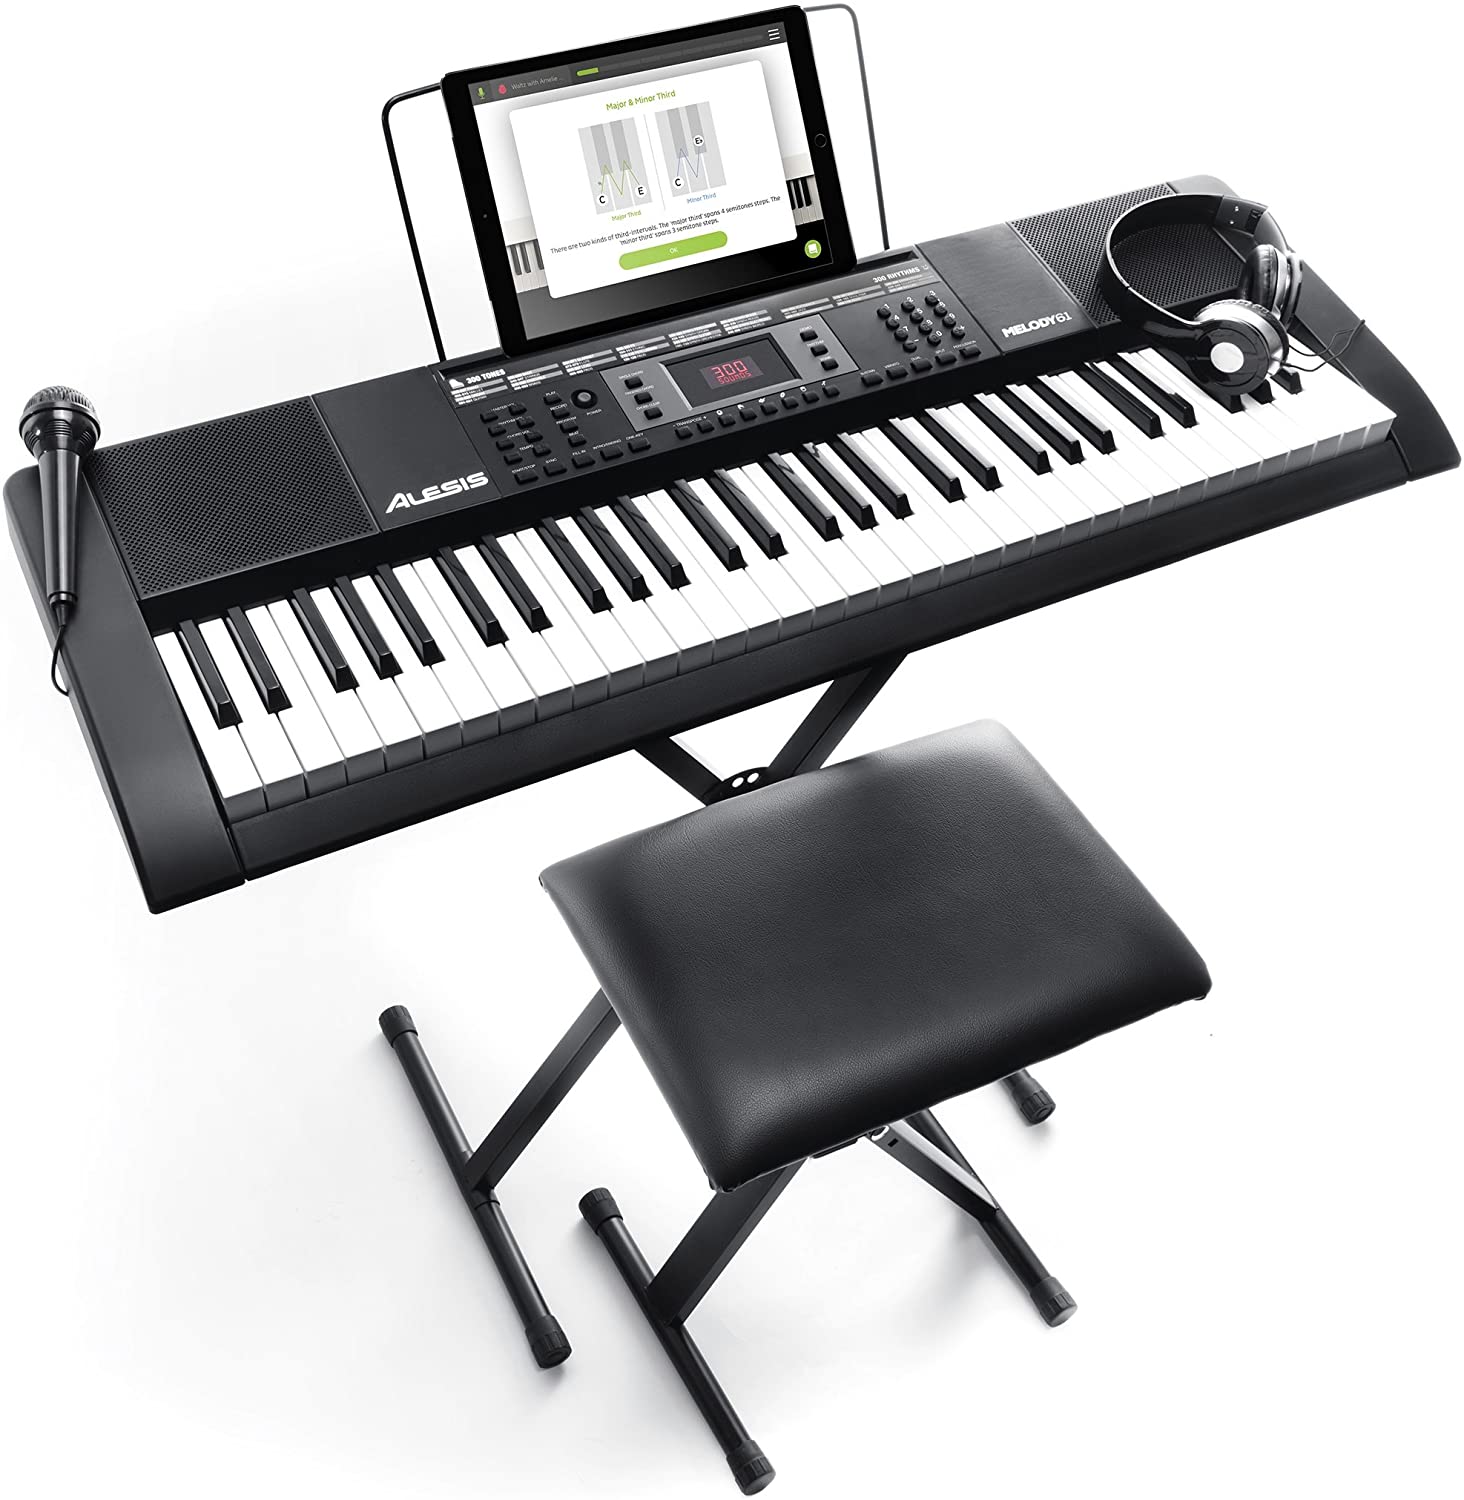 Alesis Melody 61 MKII | 61 Key Portable Keyboard Piano with Built In Speakers, Headphones, Microphone